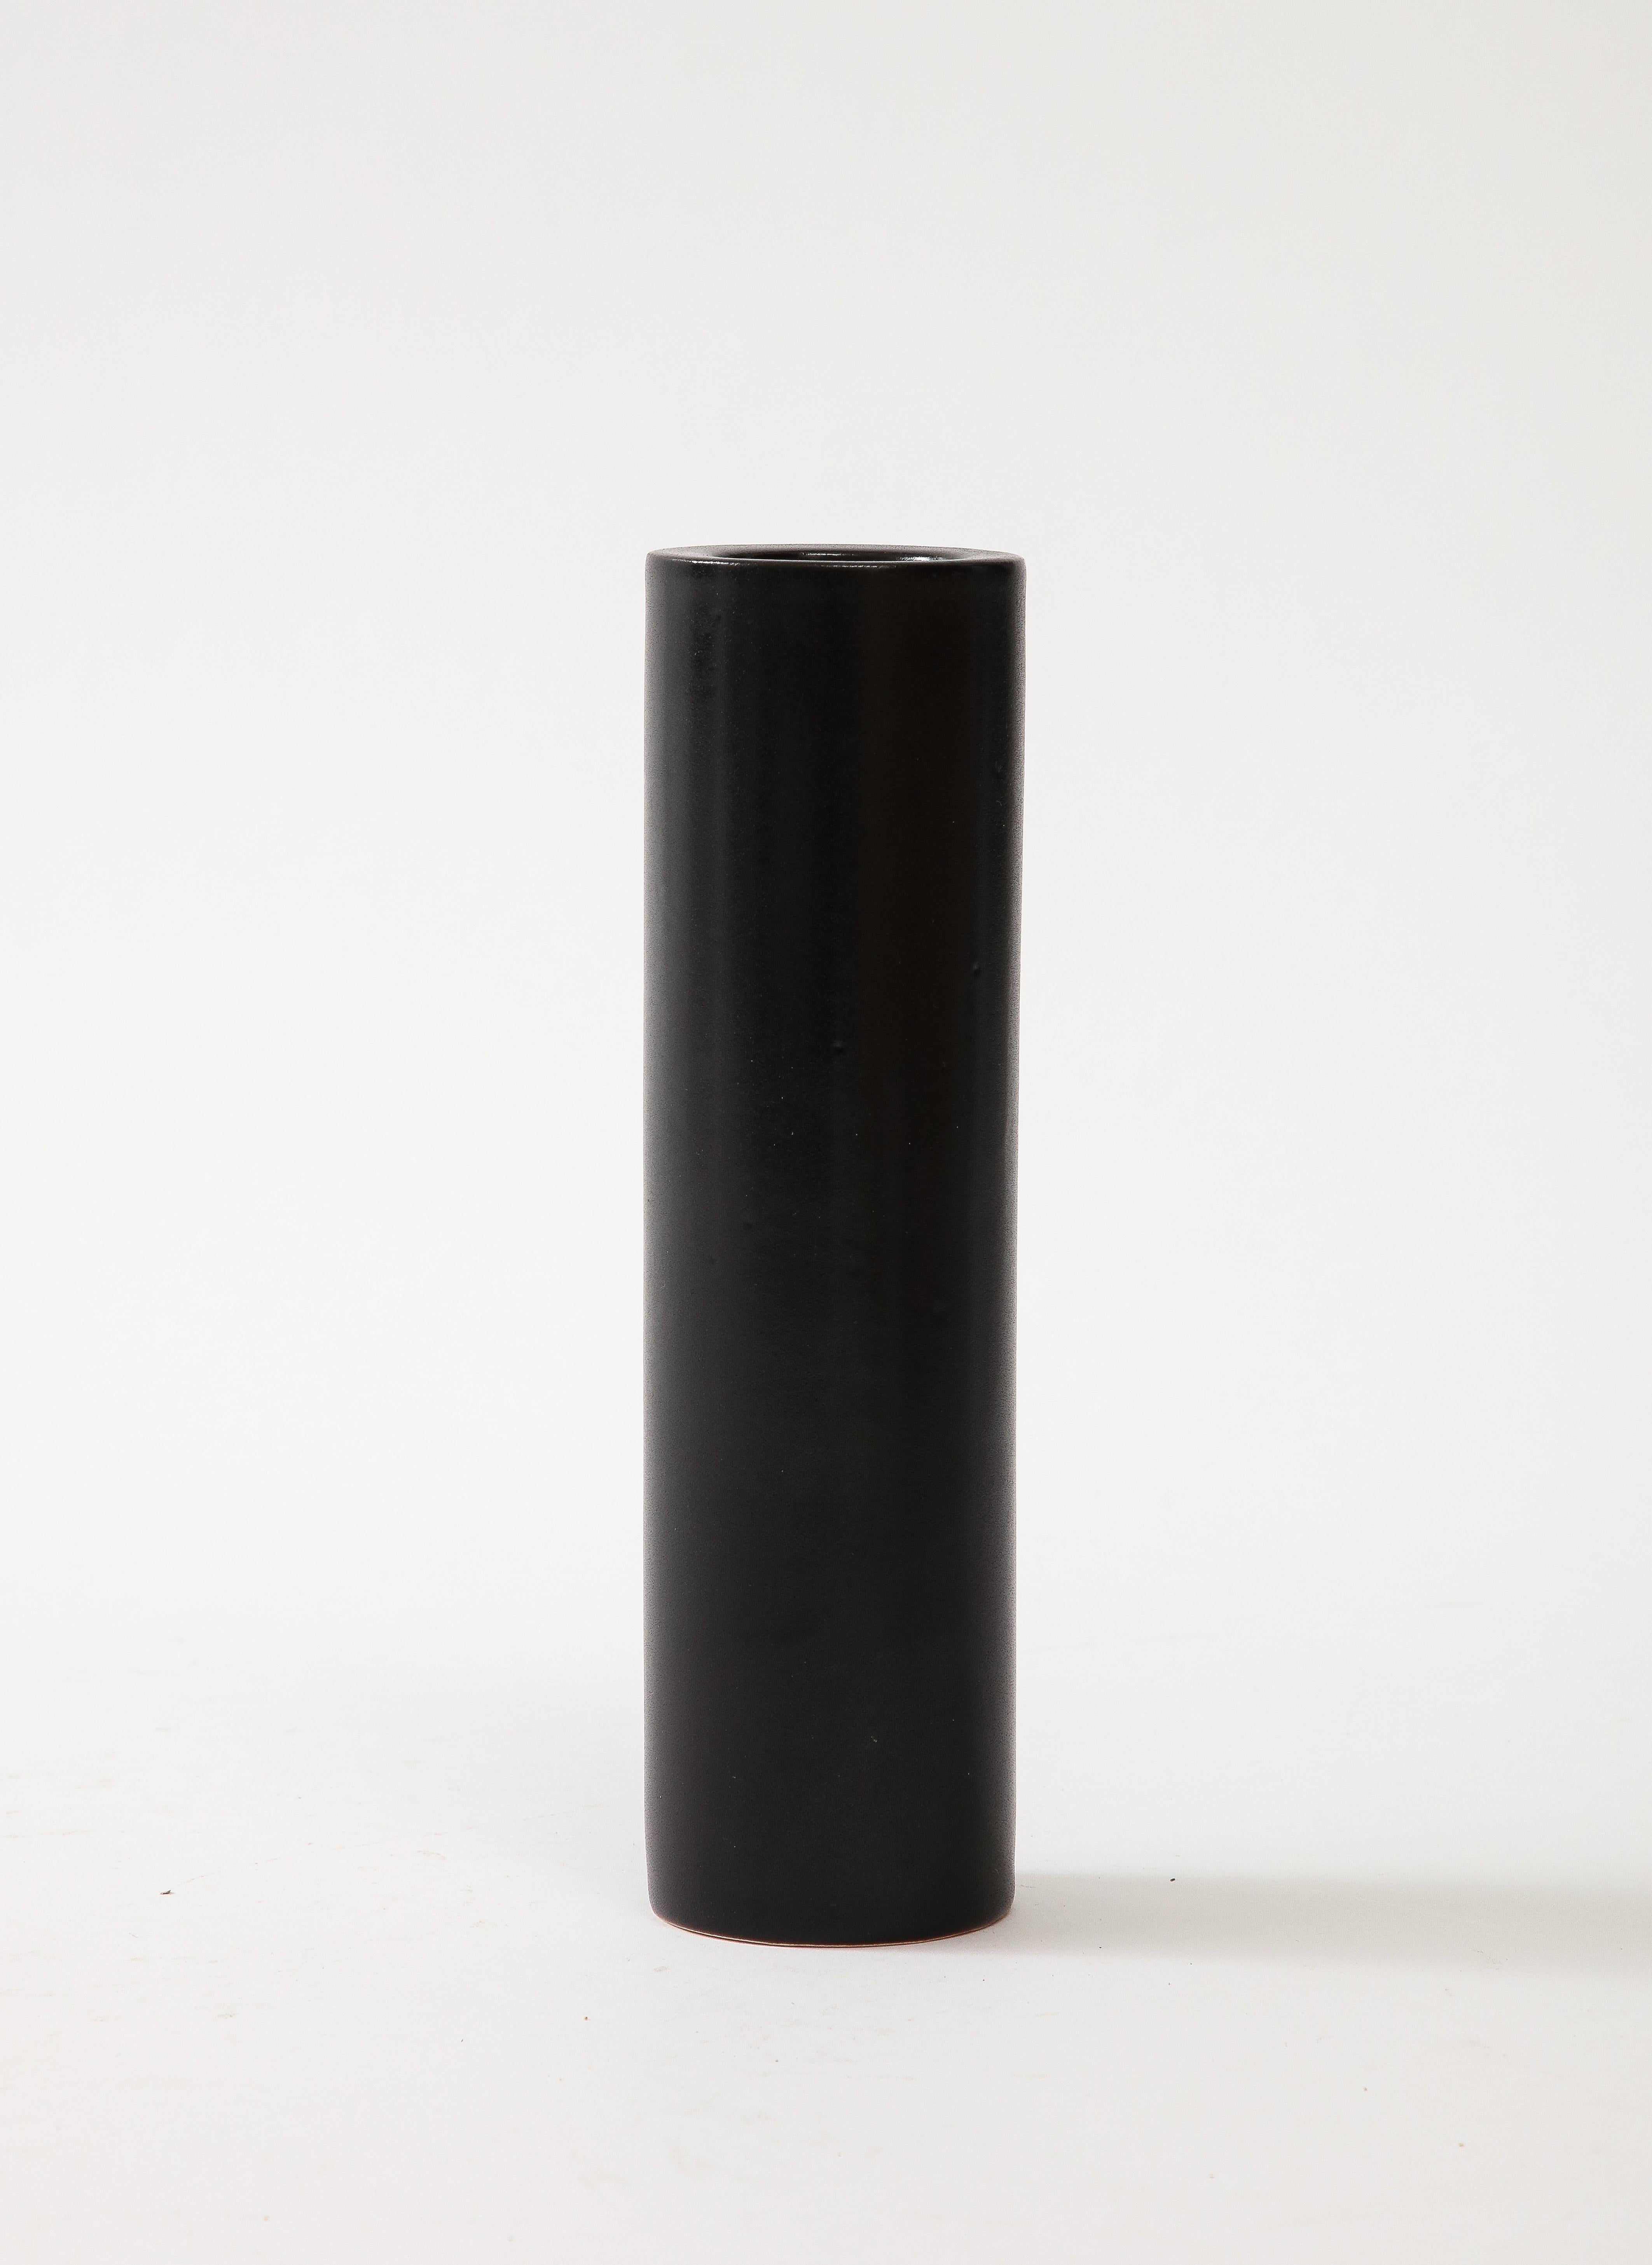 Ceramic Franco Pozzi Cylinder Thick Walled Vase, Italy, c. 1970 For Sale